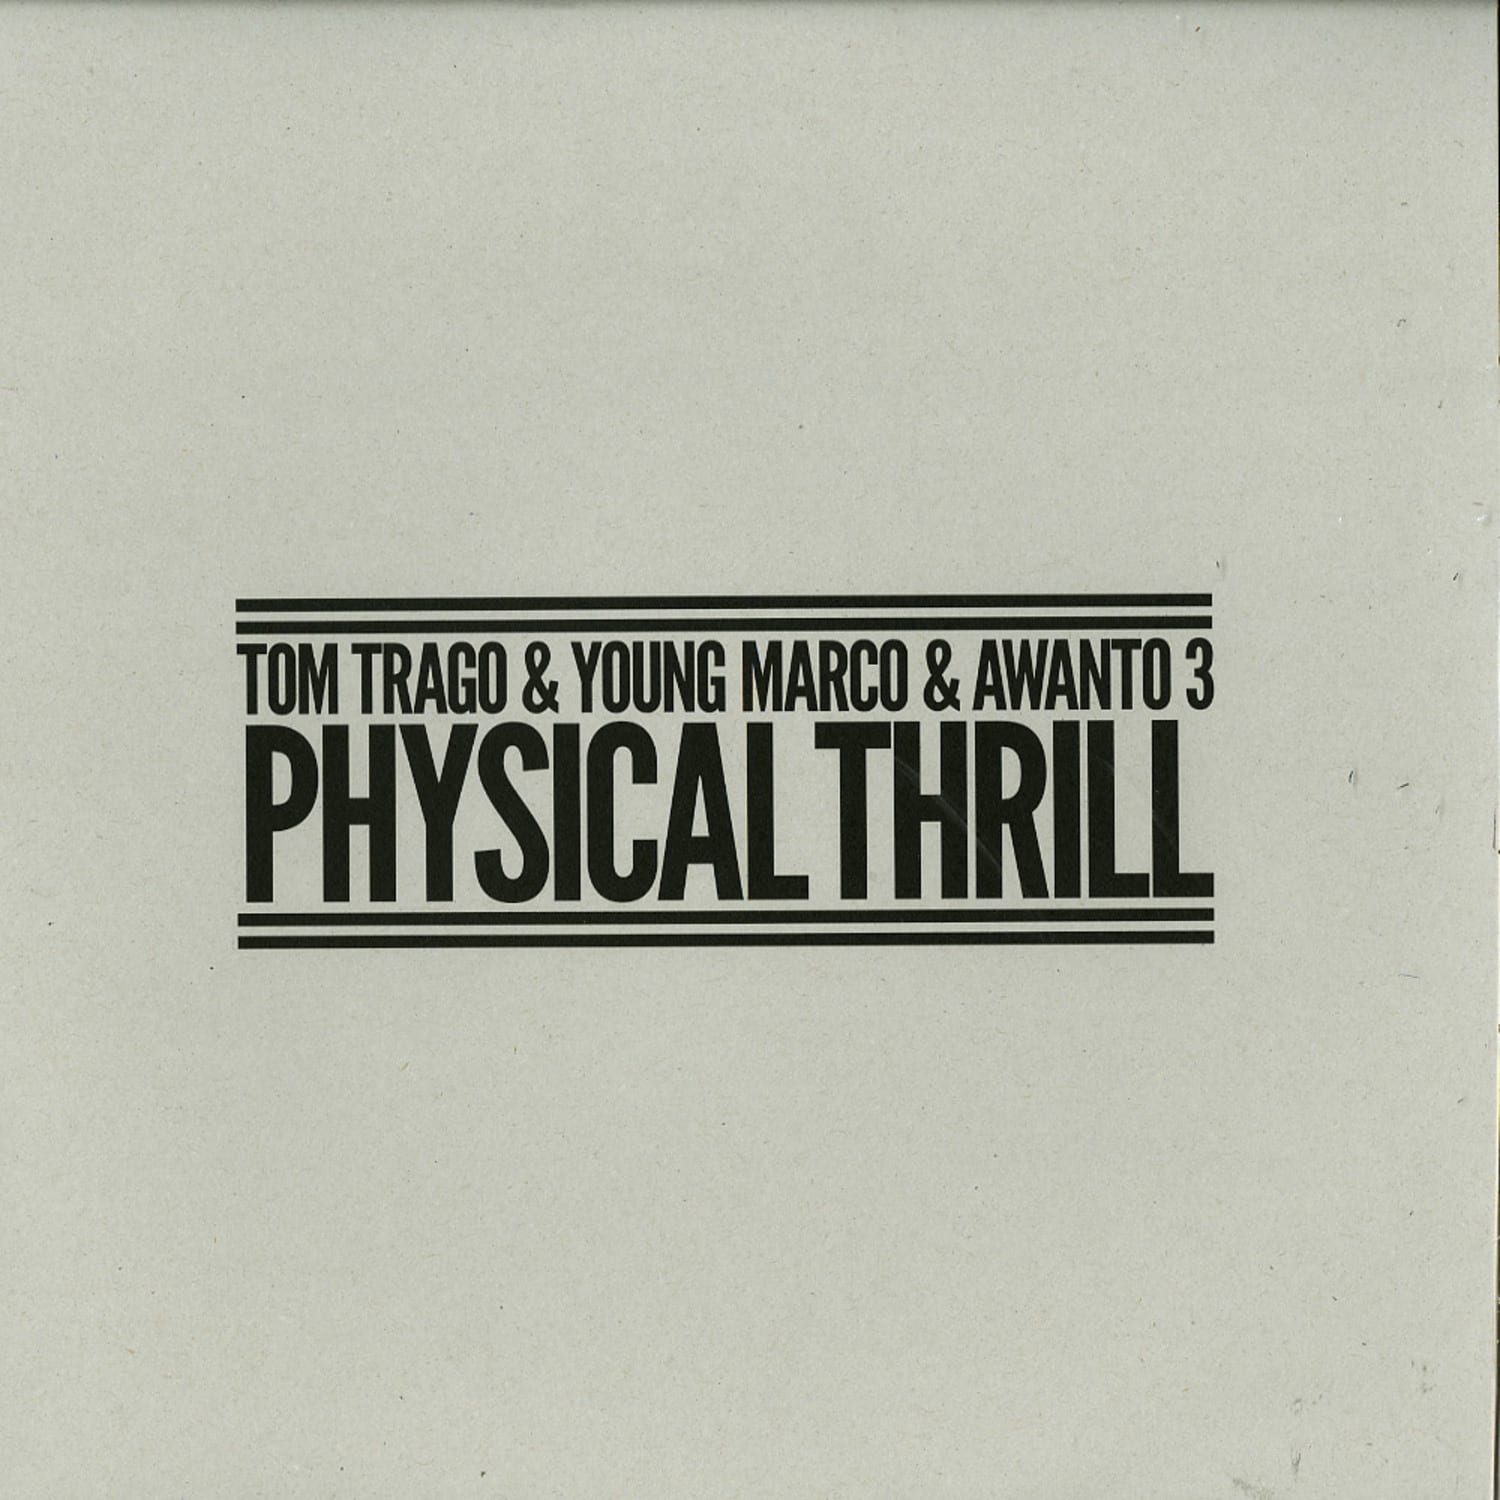 Tom Trago & Young Marco & Awanto3 - PHYSICAL THRILL